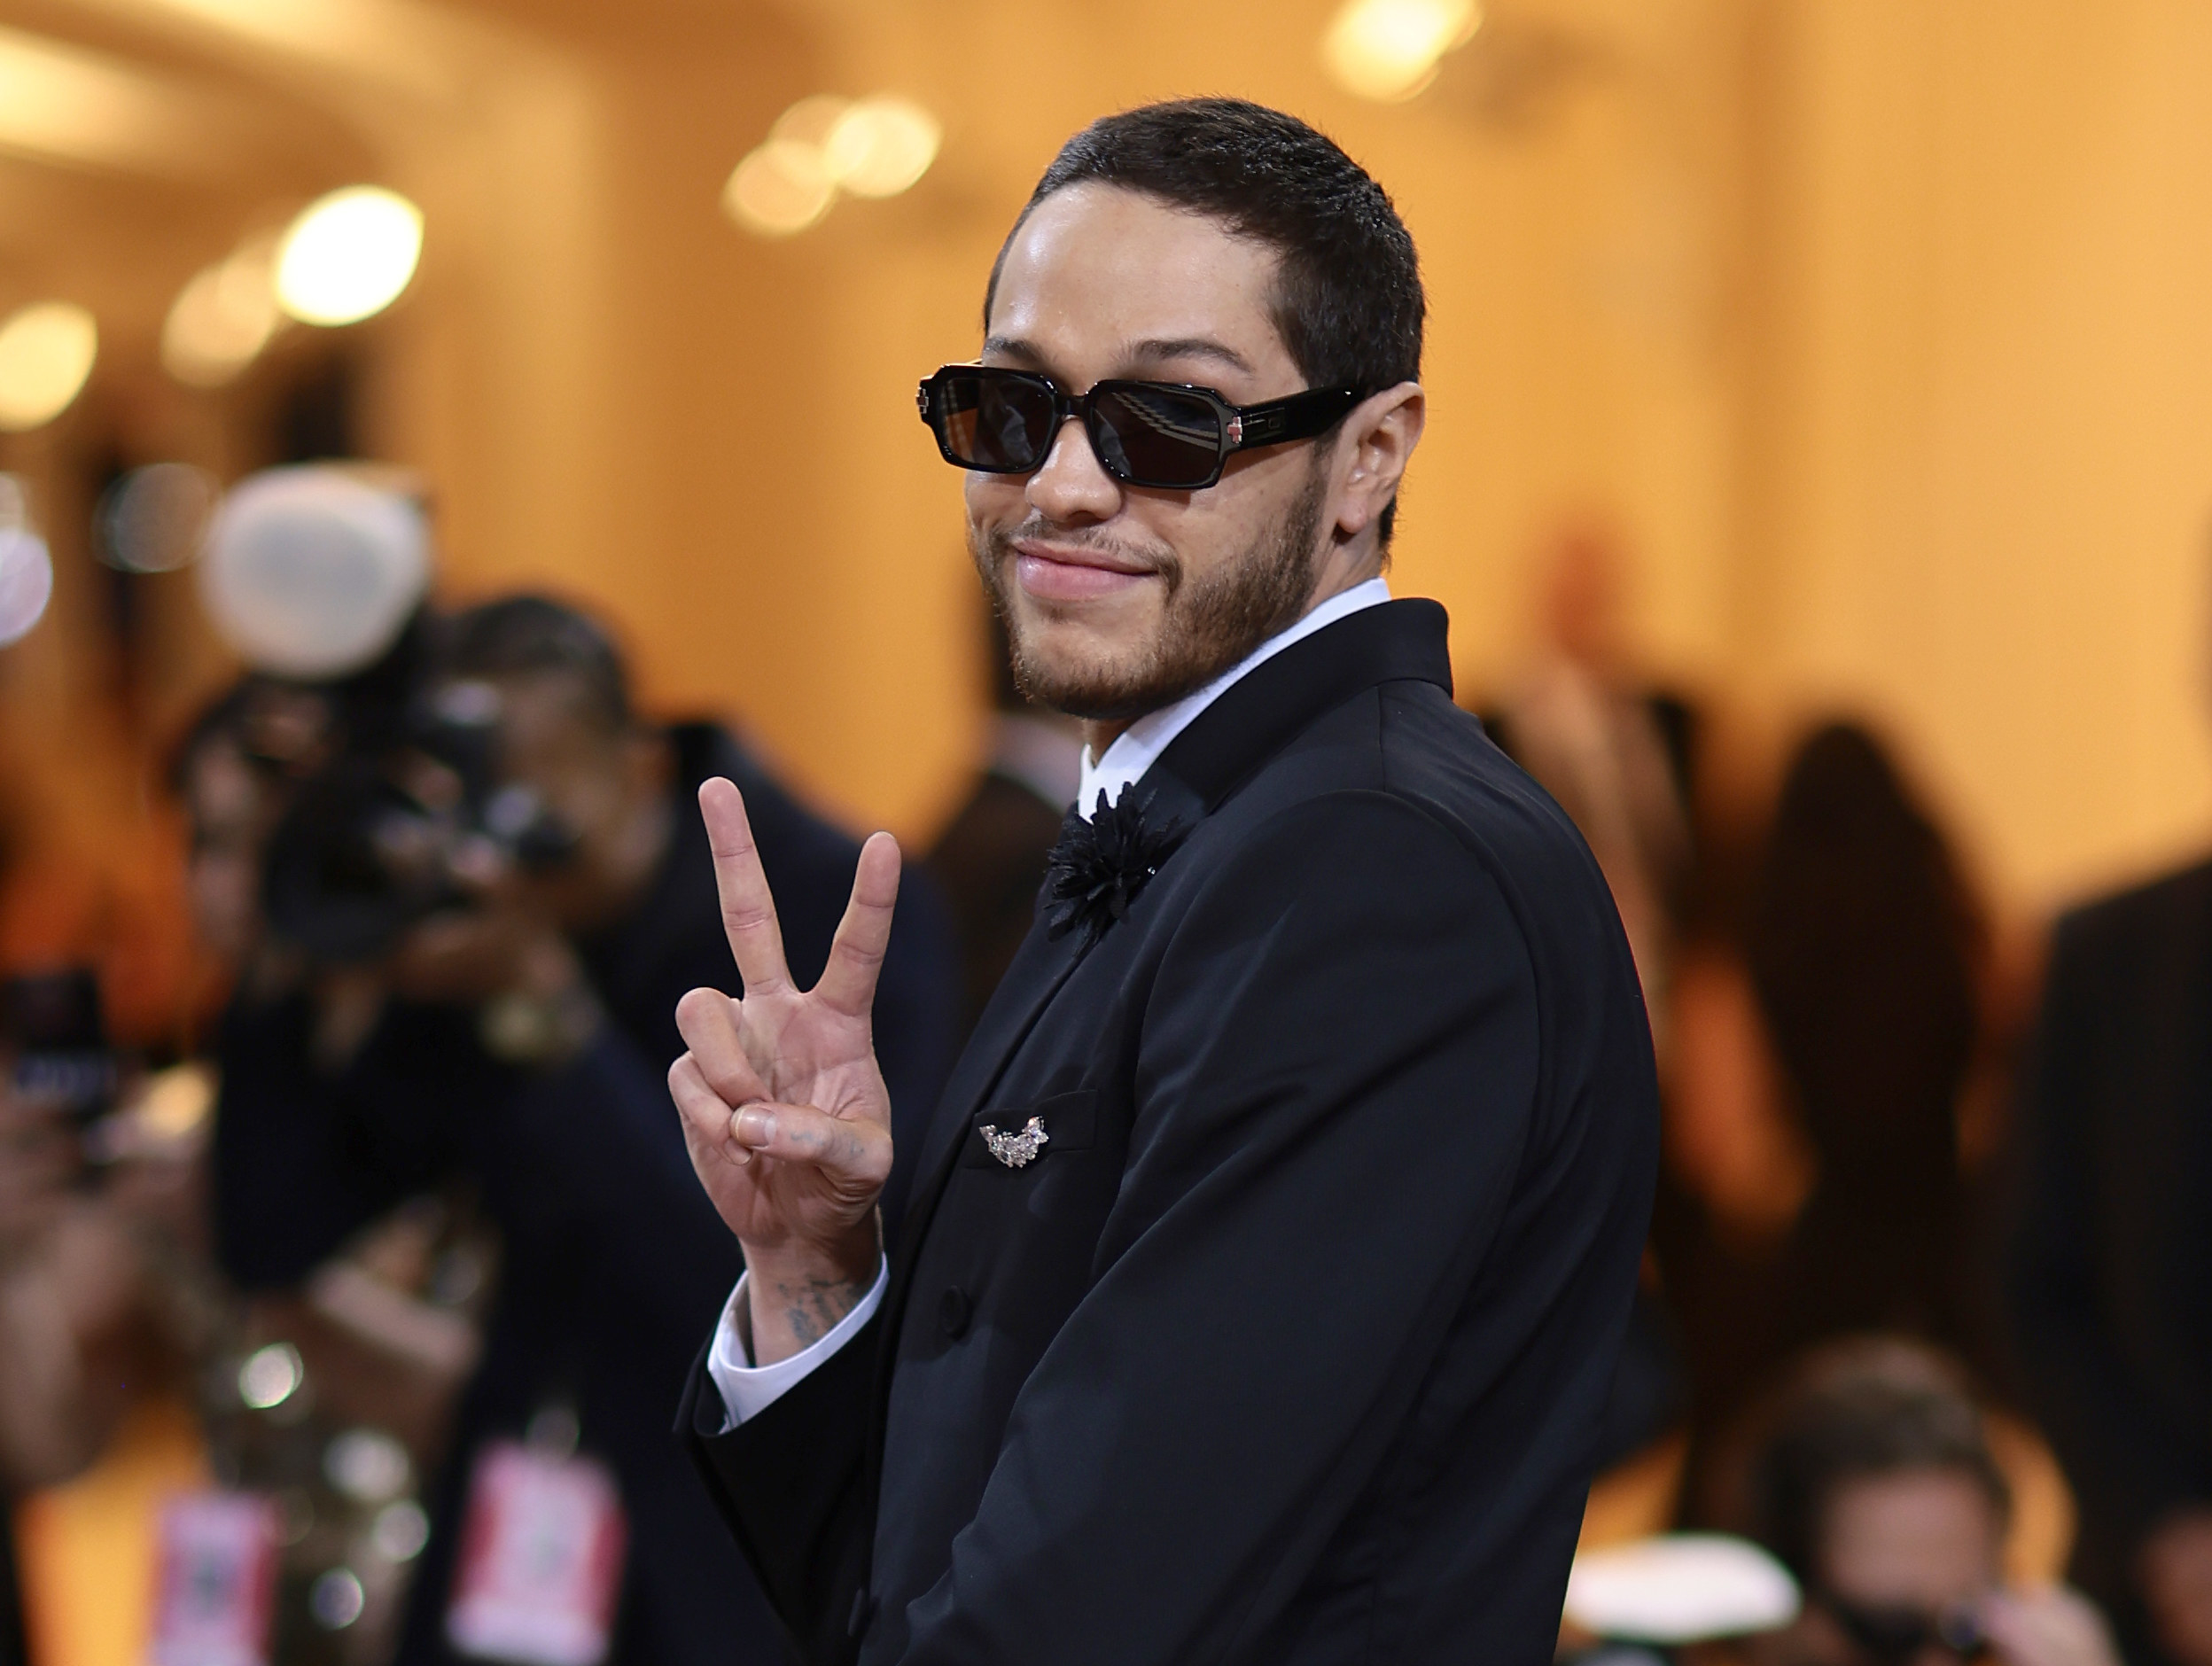 Pete Davidson attends The 2022 Met Gala Celebrating &quot;In America: An Anthology of Fashion&quot; at The Metropolitan Museum of Art on May 02, 2022, in New York City